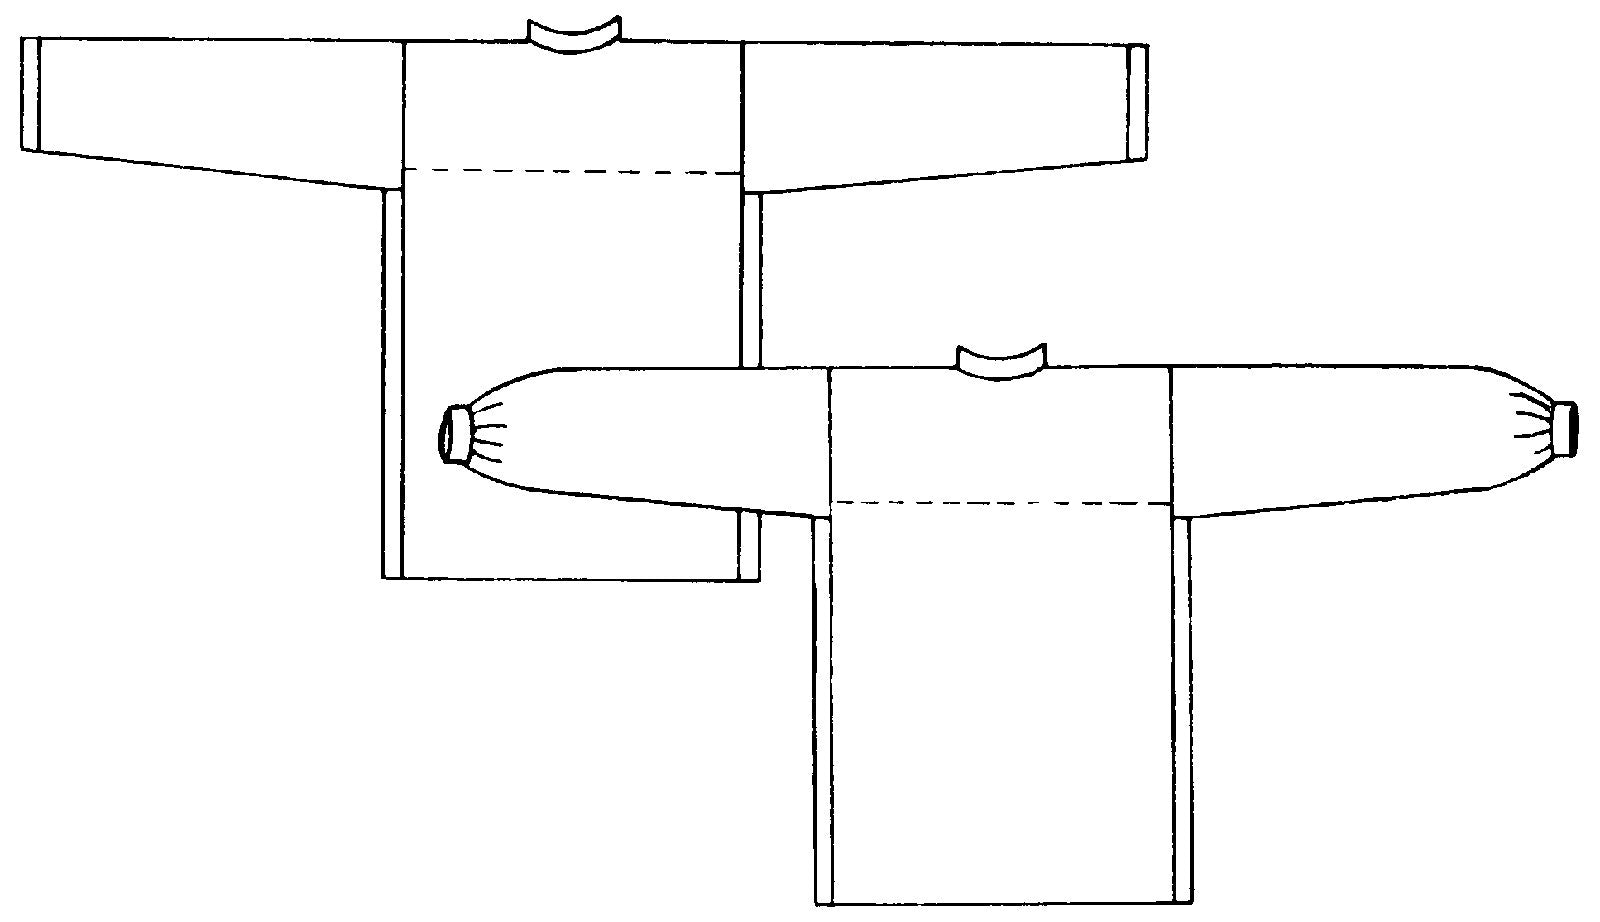 Flat line drawing of views.  View A and C have the same back view.  View B have similar lines except for the gathered sleeves at cuffs.